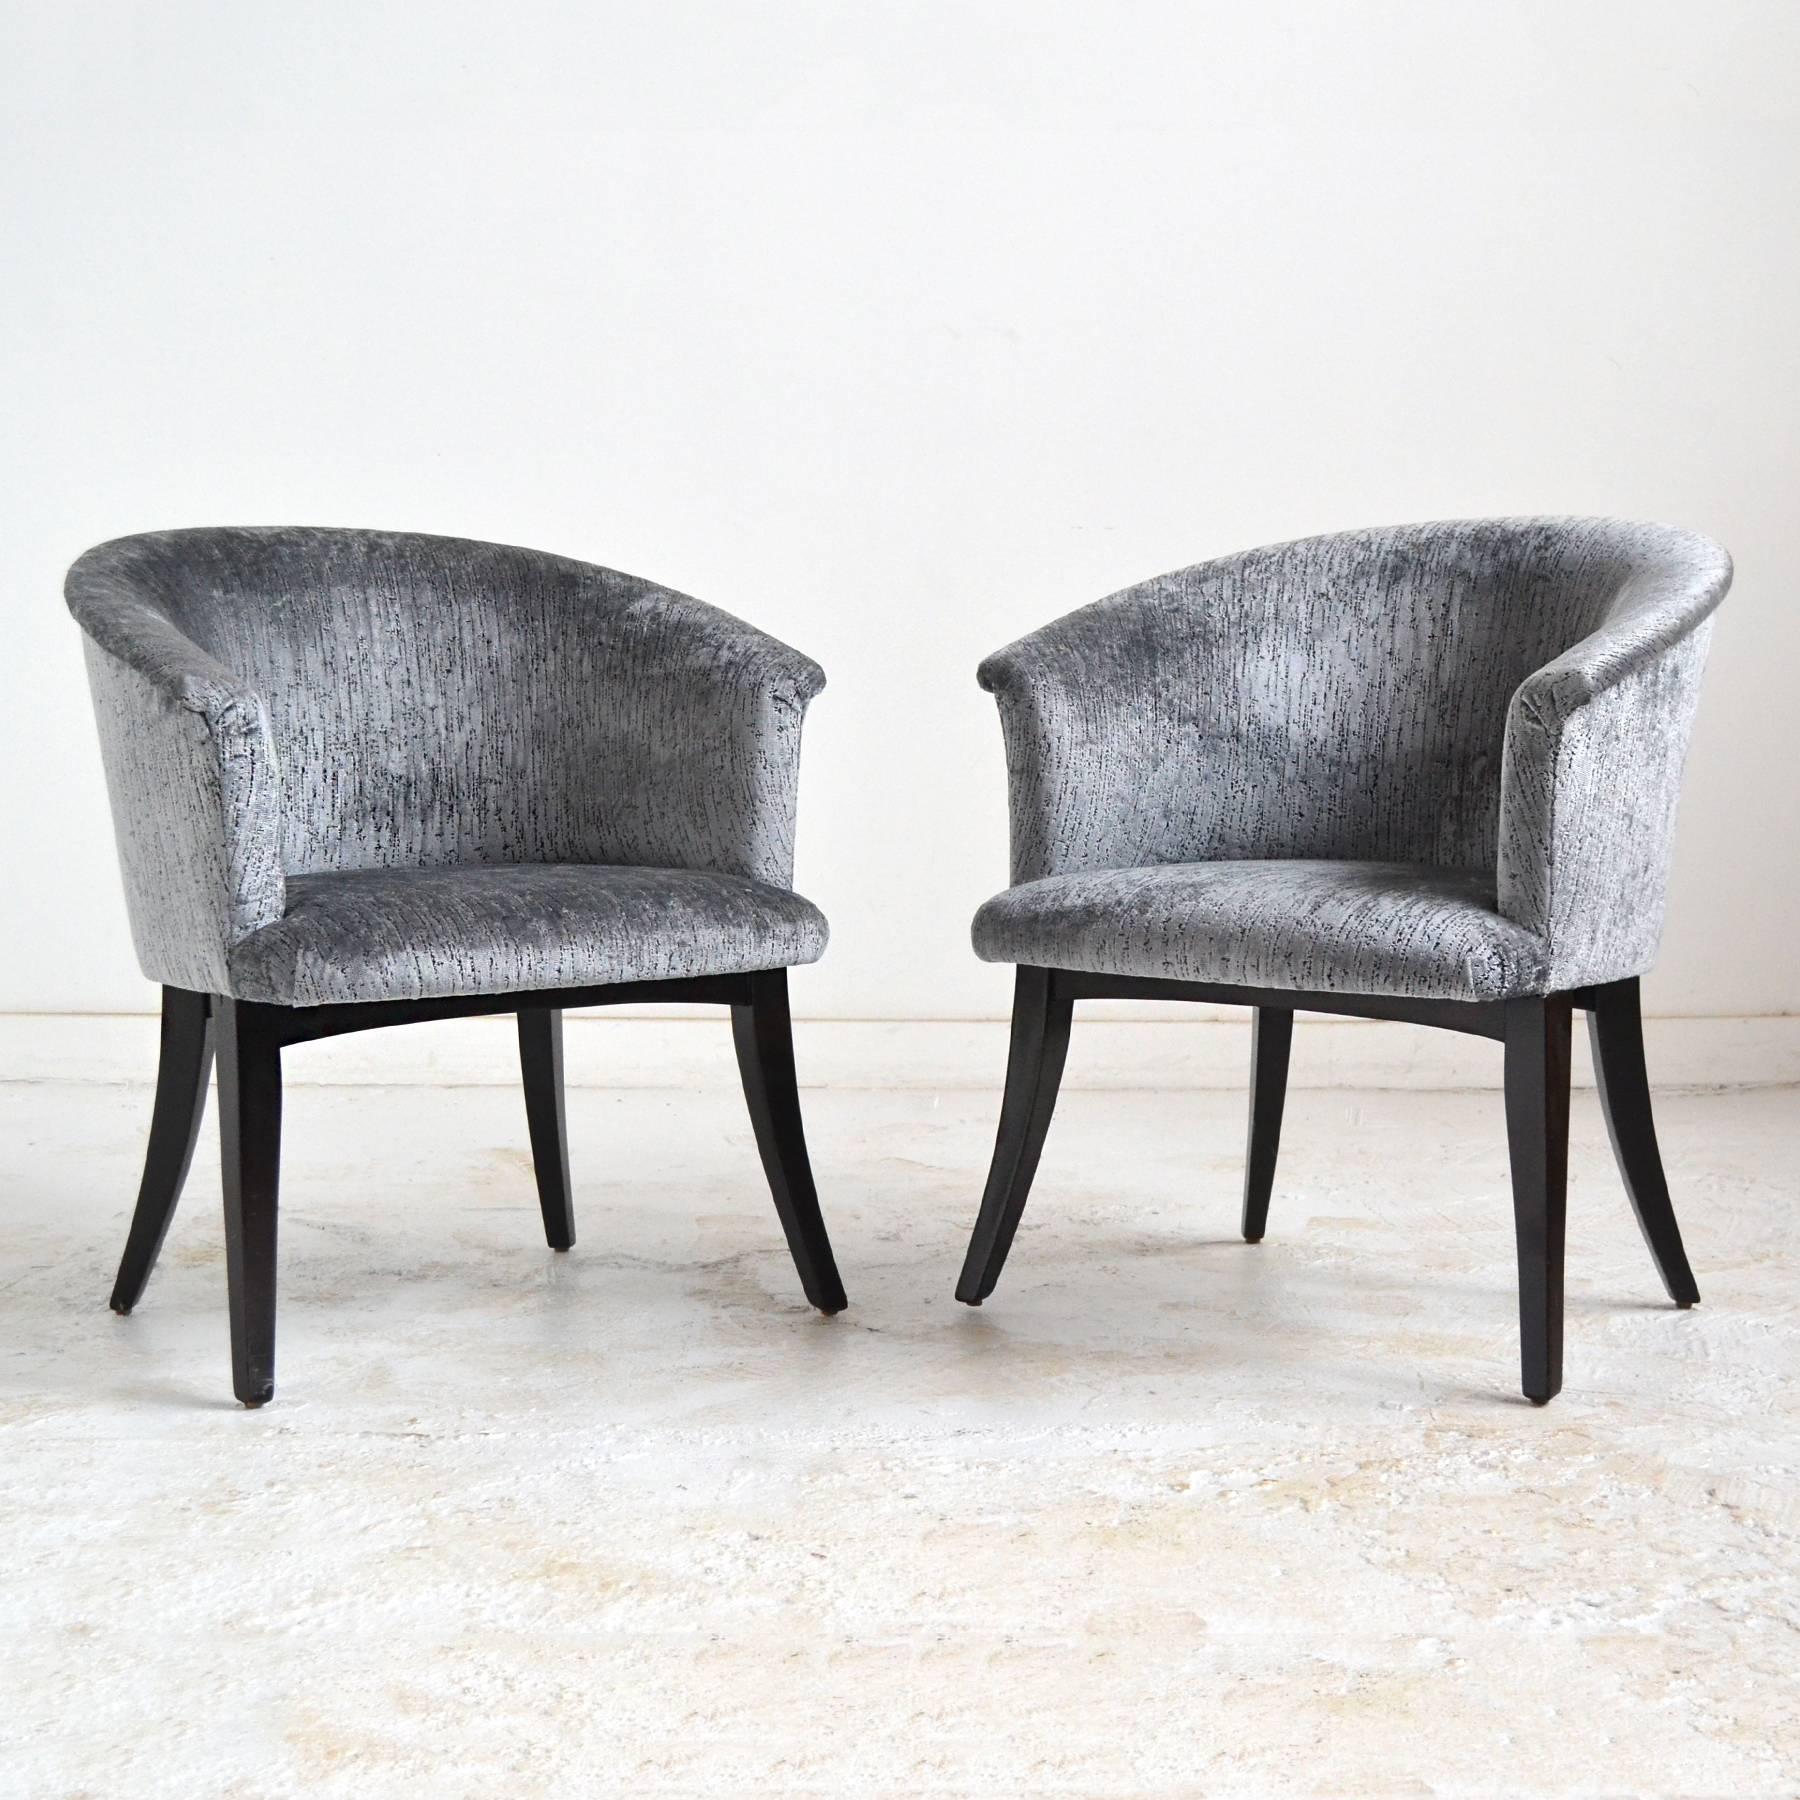 These elegant club chairs are from the period when the reigns were handed from long-time design director Edward Wormley to Roger Sprunger, so we are uncertain which noteworthy designer is the creator of these beautiful chairs.
The upholstered seats